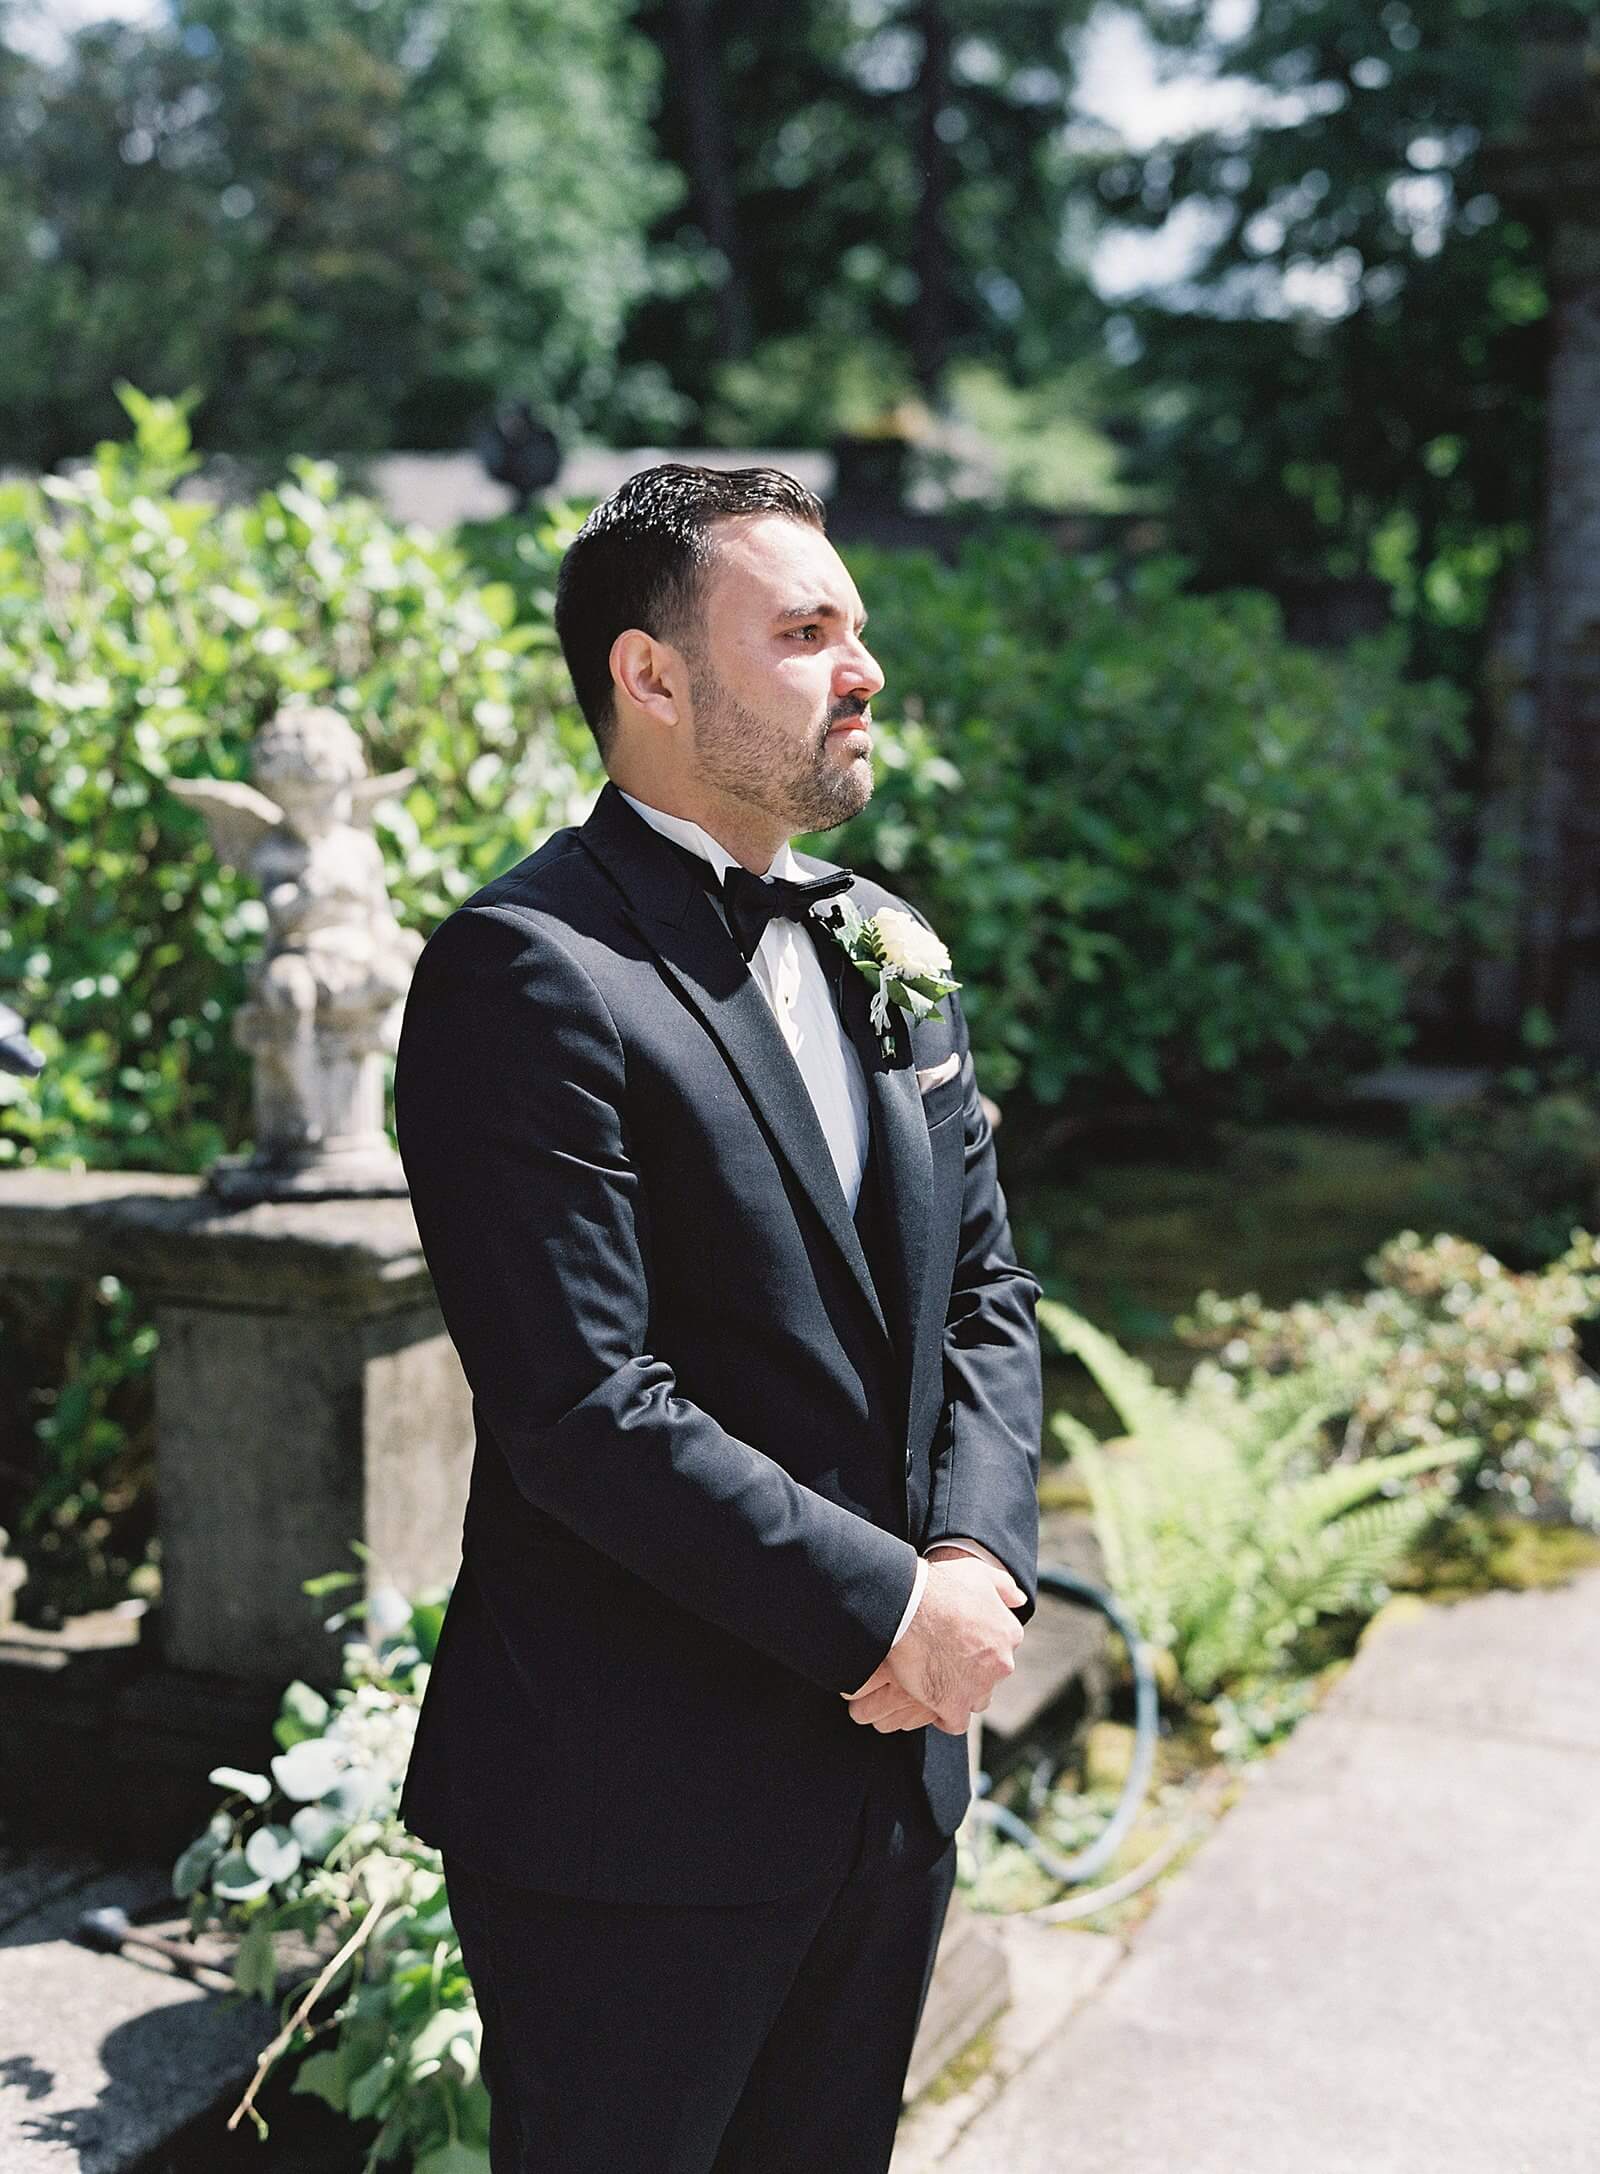 Groom tears up seeing his bride walking up the aisle - Jacqueline Benét Photography